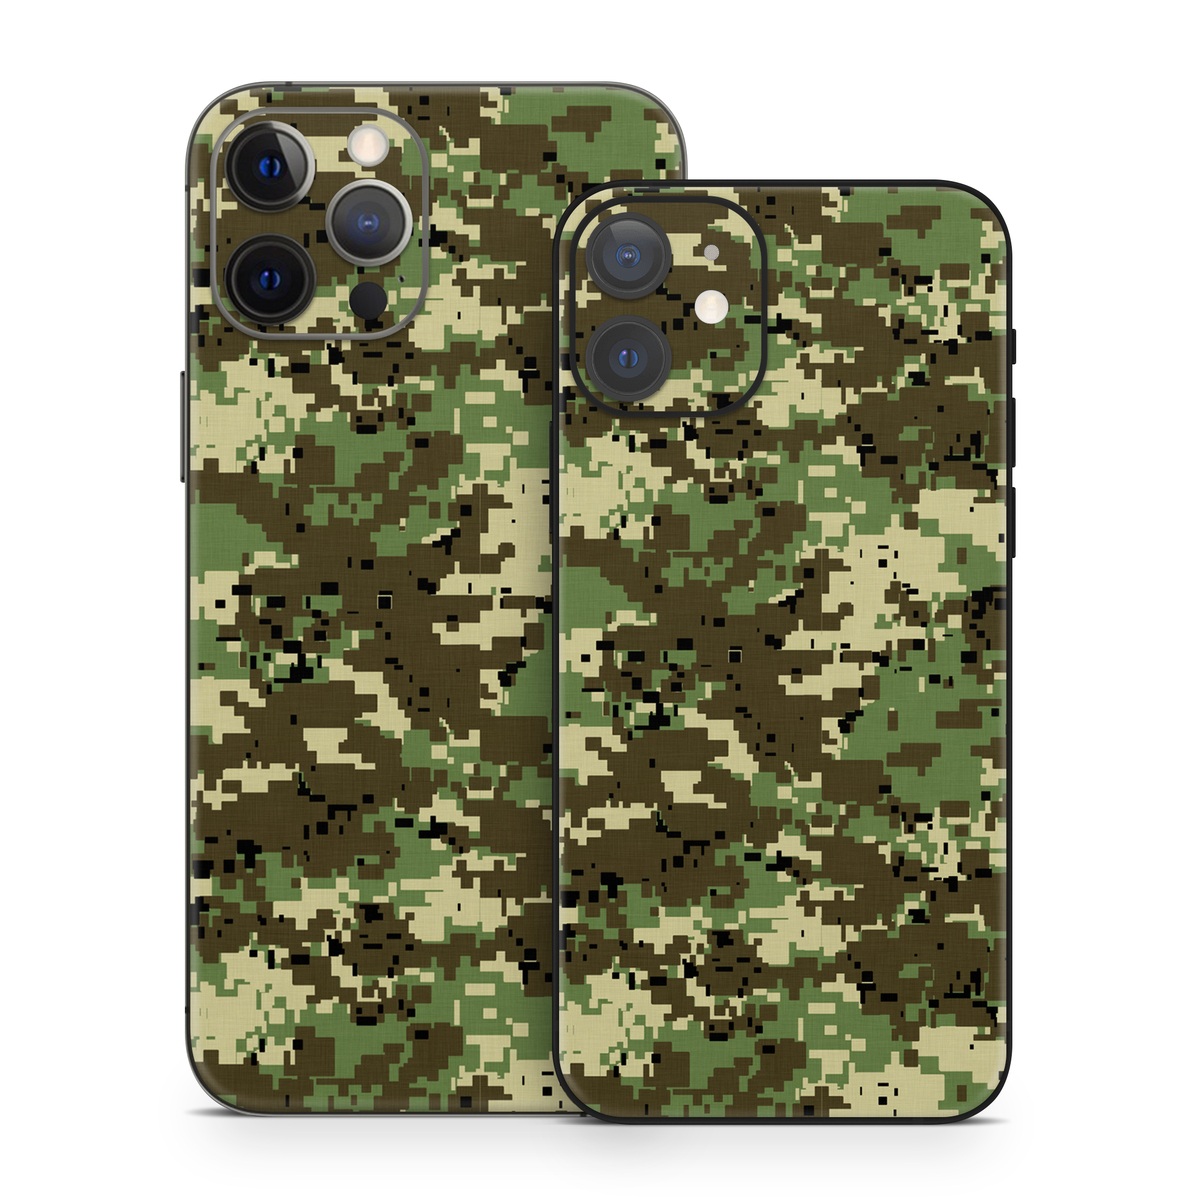 iPhone 12 Series Skin design of Military camouflage, Pattern, Camouflage, Green, Uniform, Clothing, Design, Military uniform, with black, gray, green colors